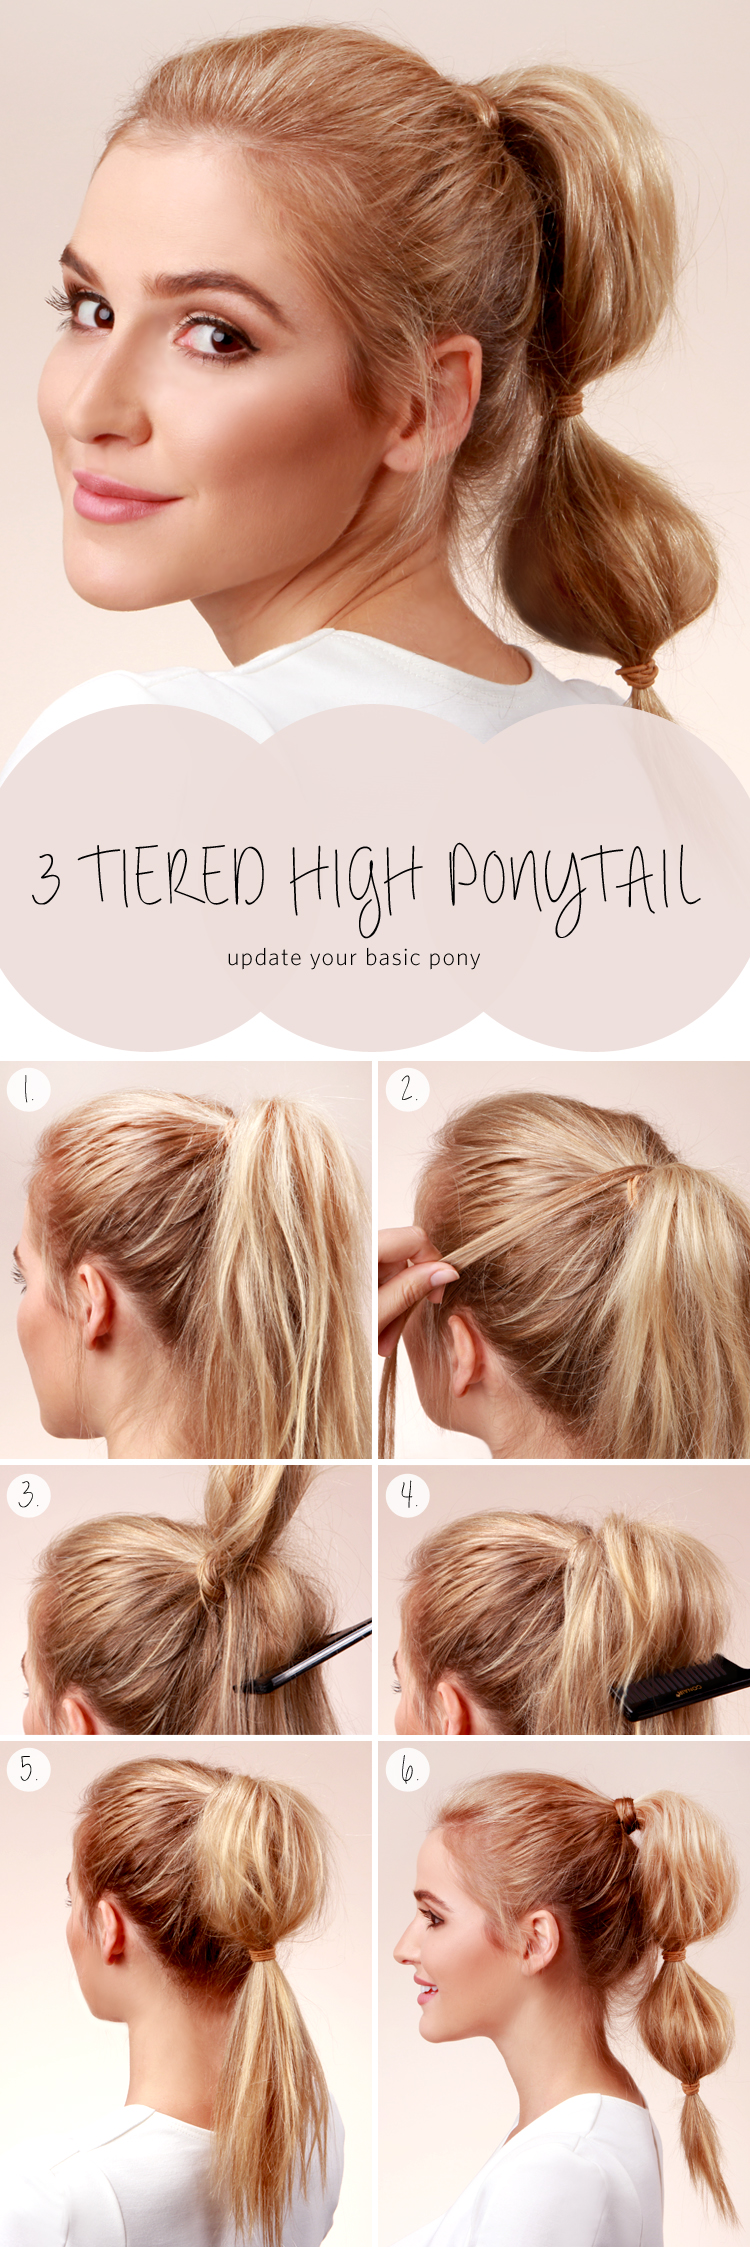 Cute Ponytail Hairstyle Tutorial